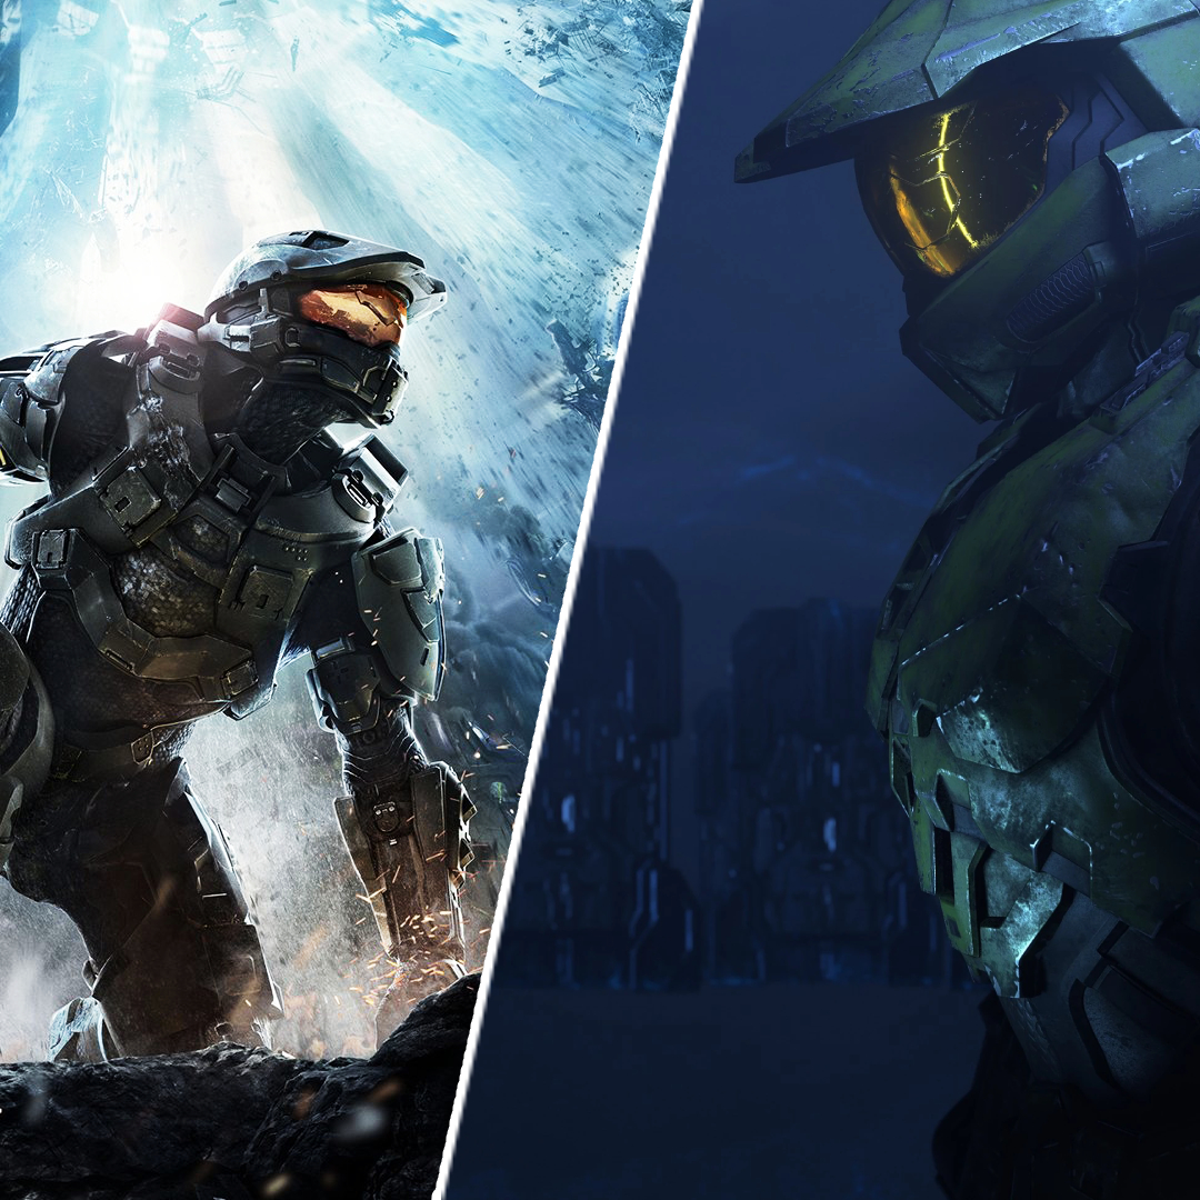 With the state of Halo Infinite now, Halo 4 is looking damn good on its  10th anniversary